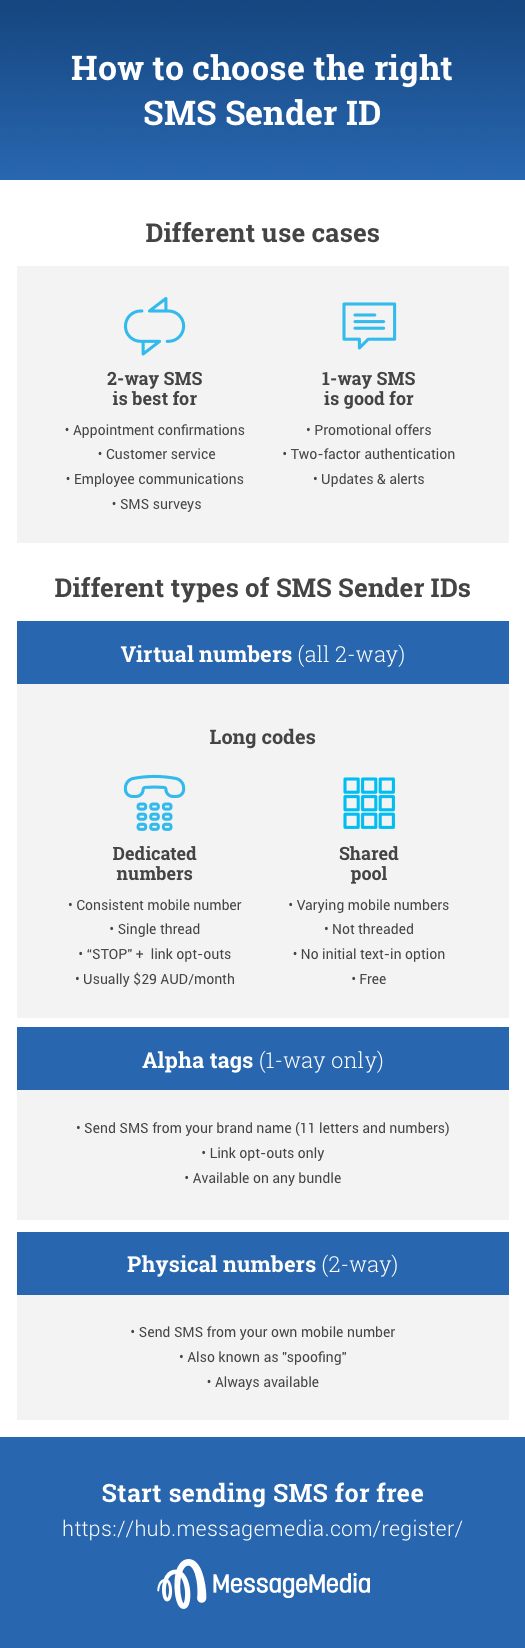 How to Choose SMS Sender ID in Australia Infographic